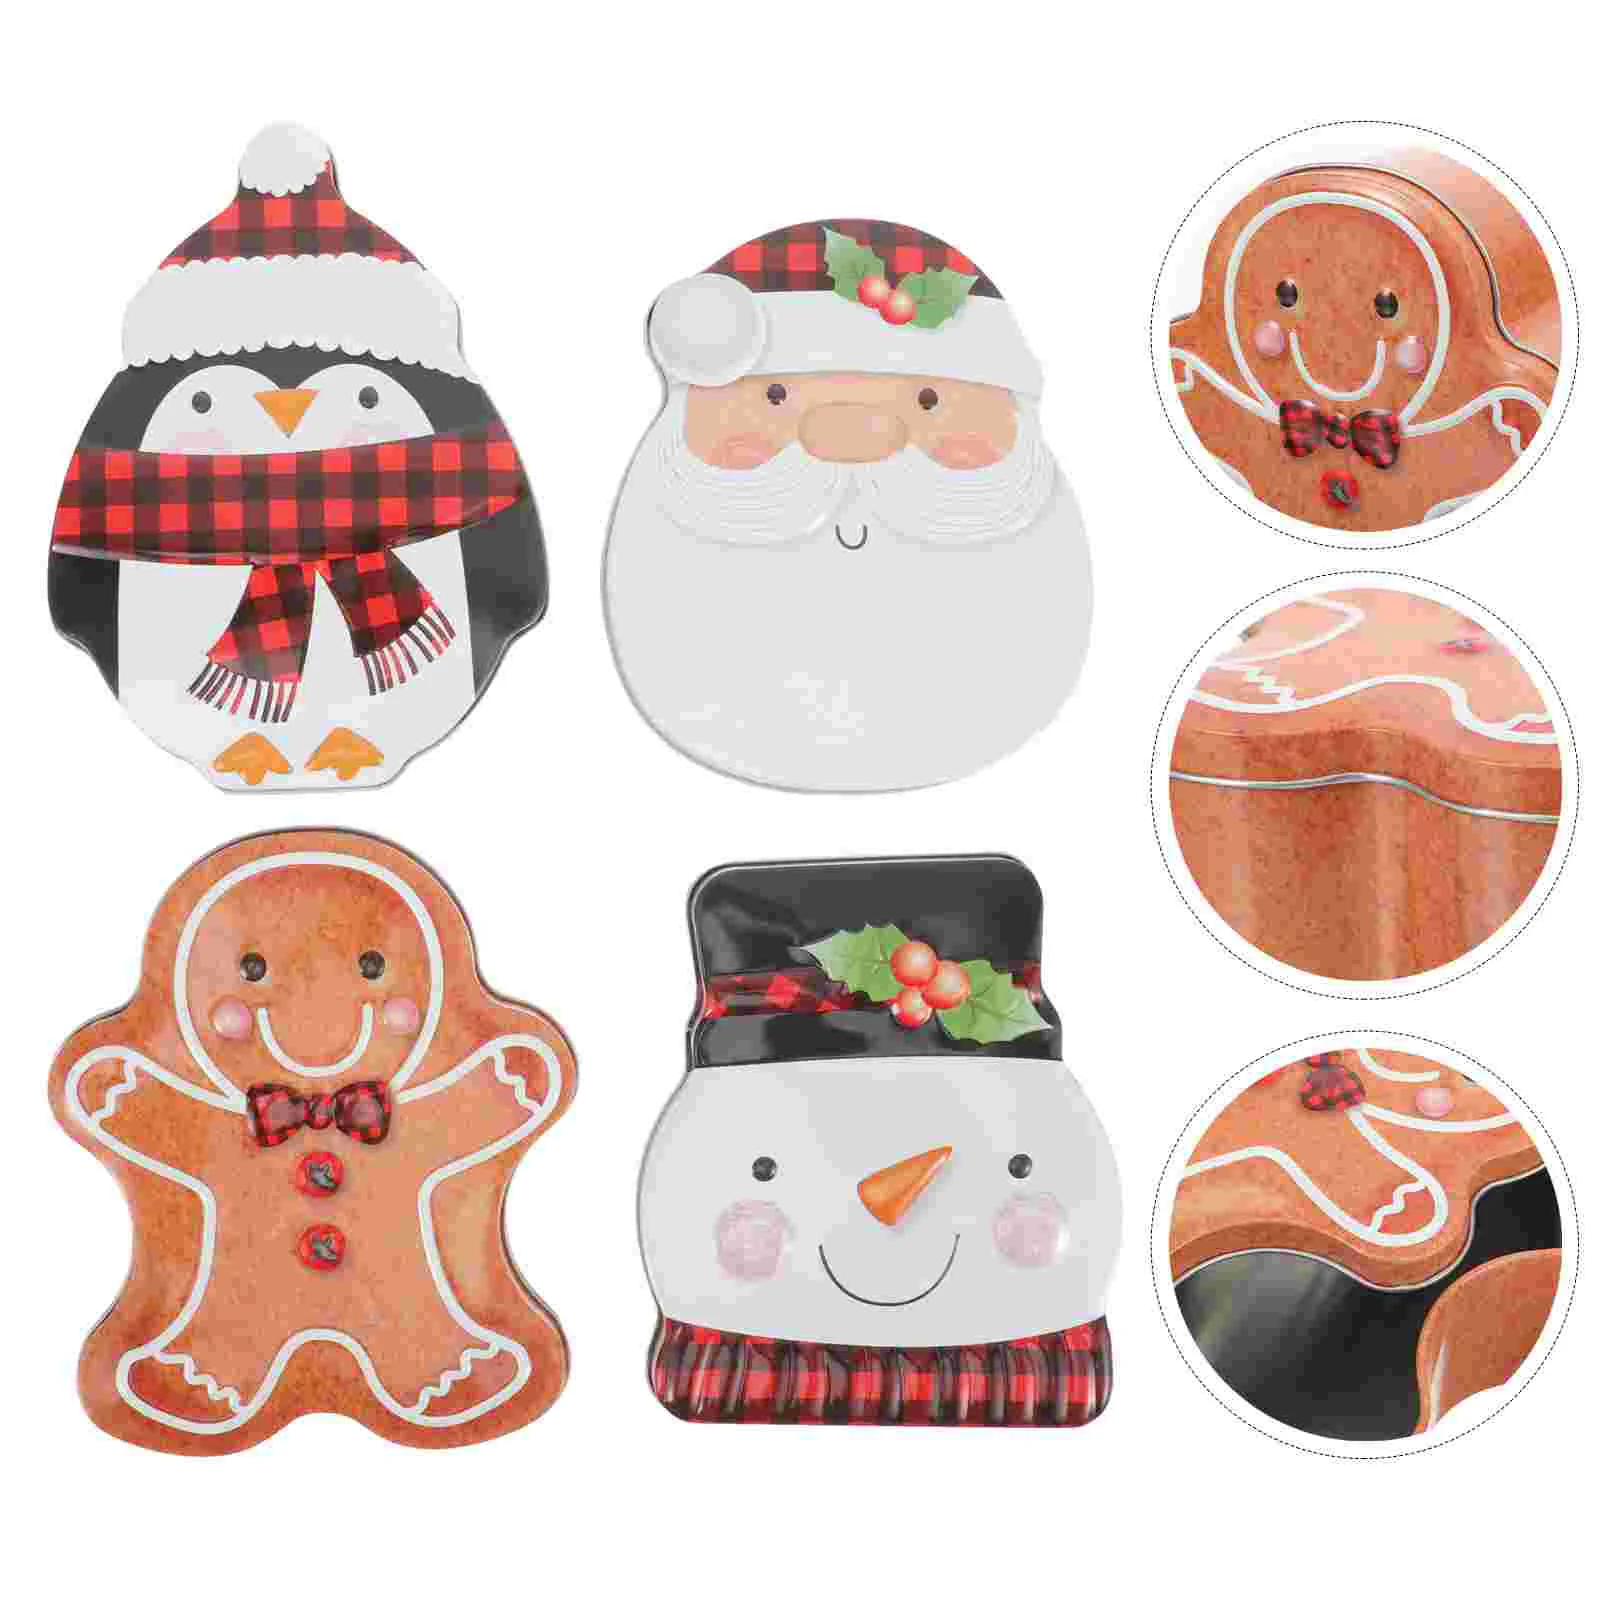 

4pcs Christmas Tinplate Box Cookie Candy Biscuit Jar Storage Can Decorative Cookie Biscuits Box